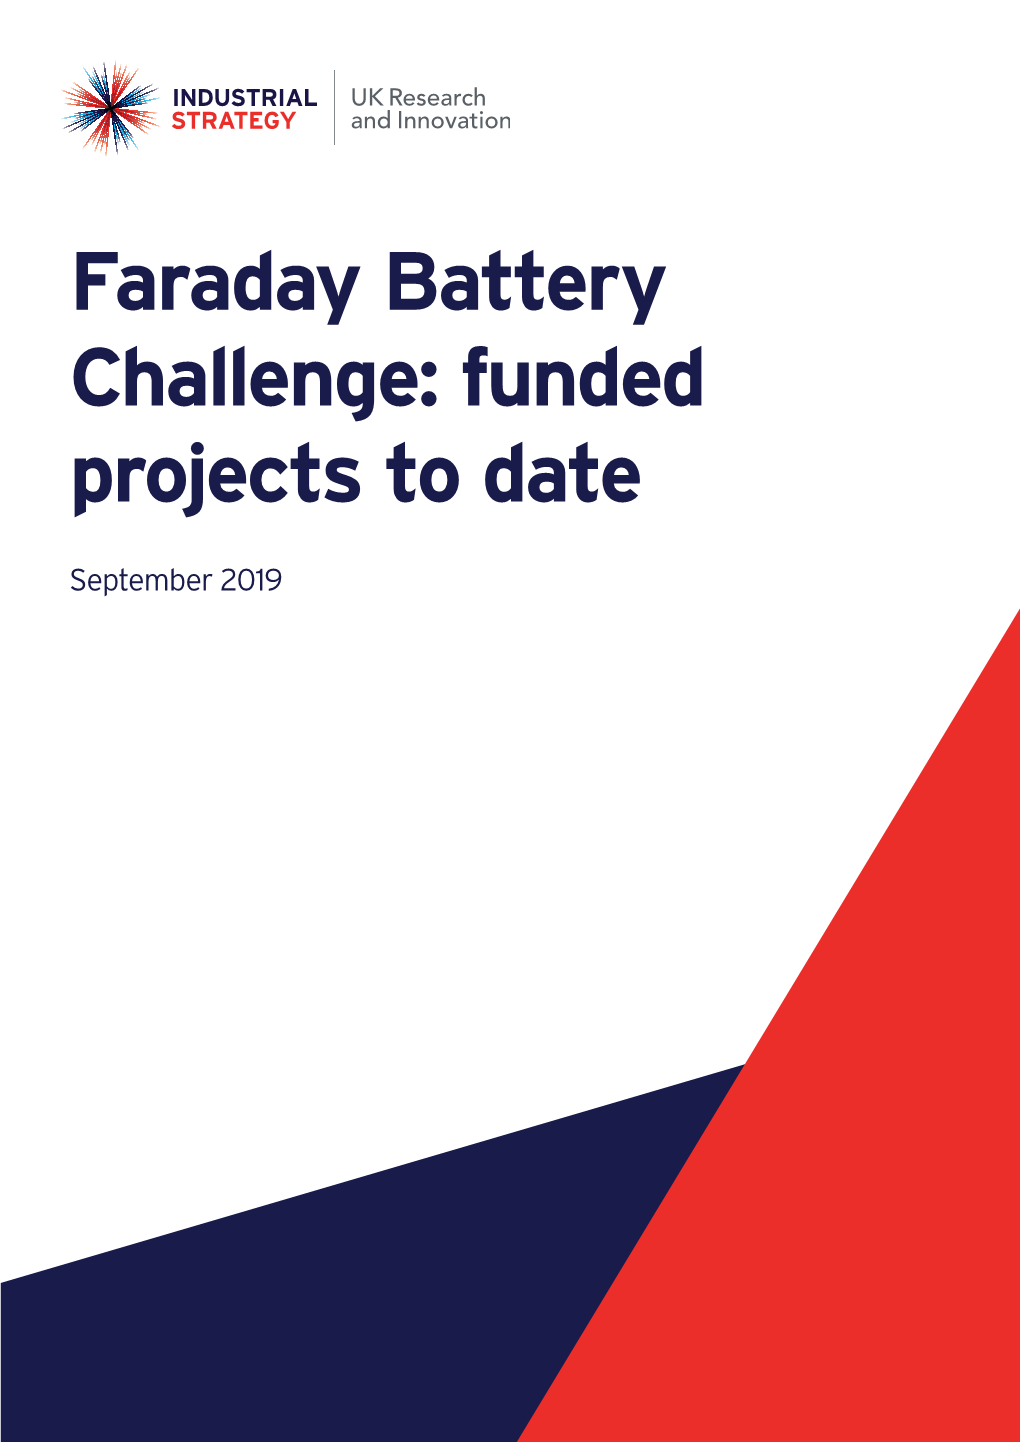 Faraday Battery Challenge: Funded Projects to Date